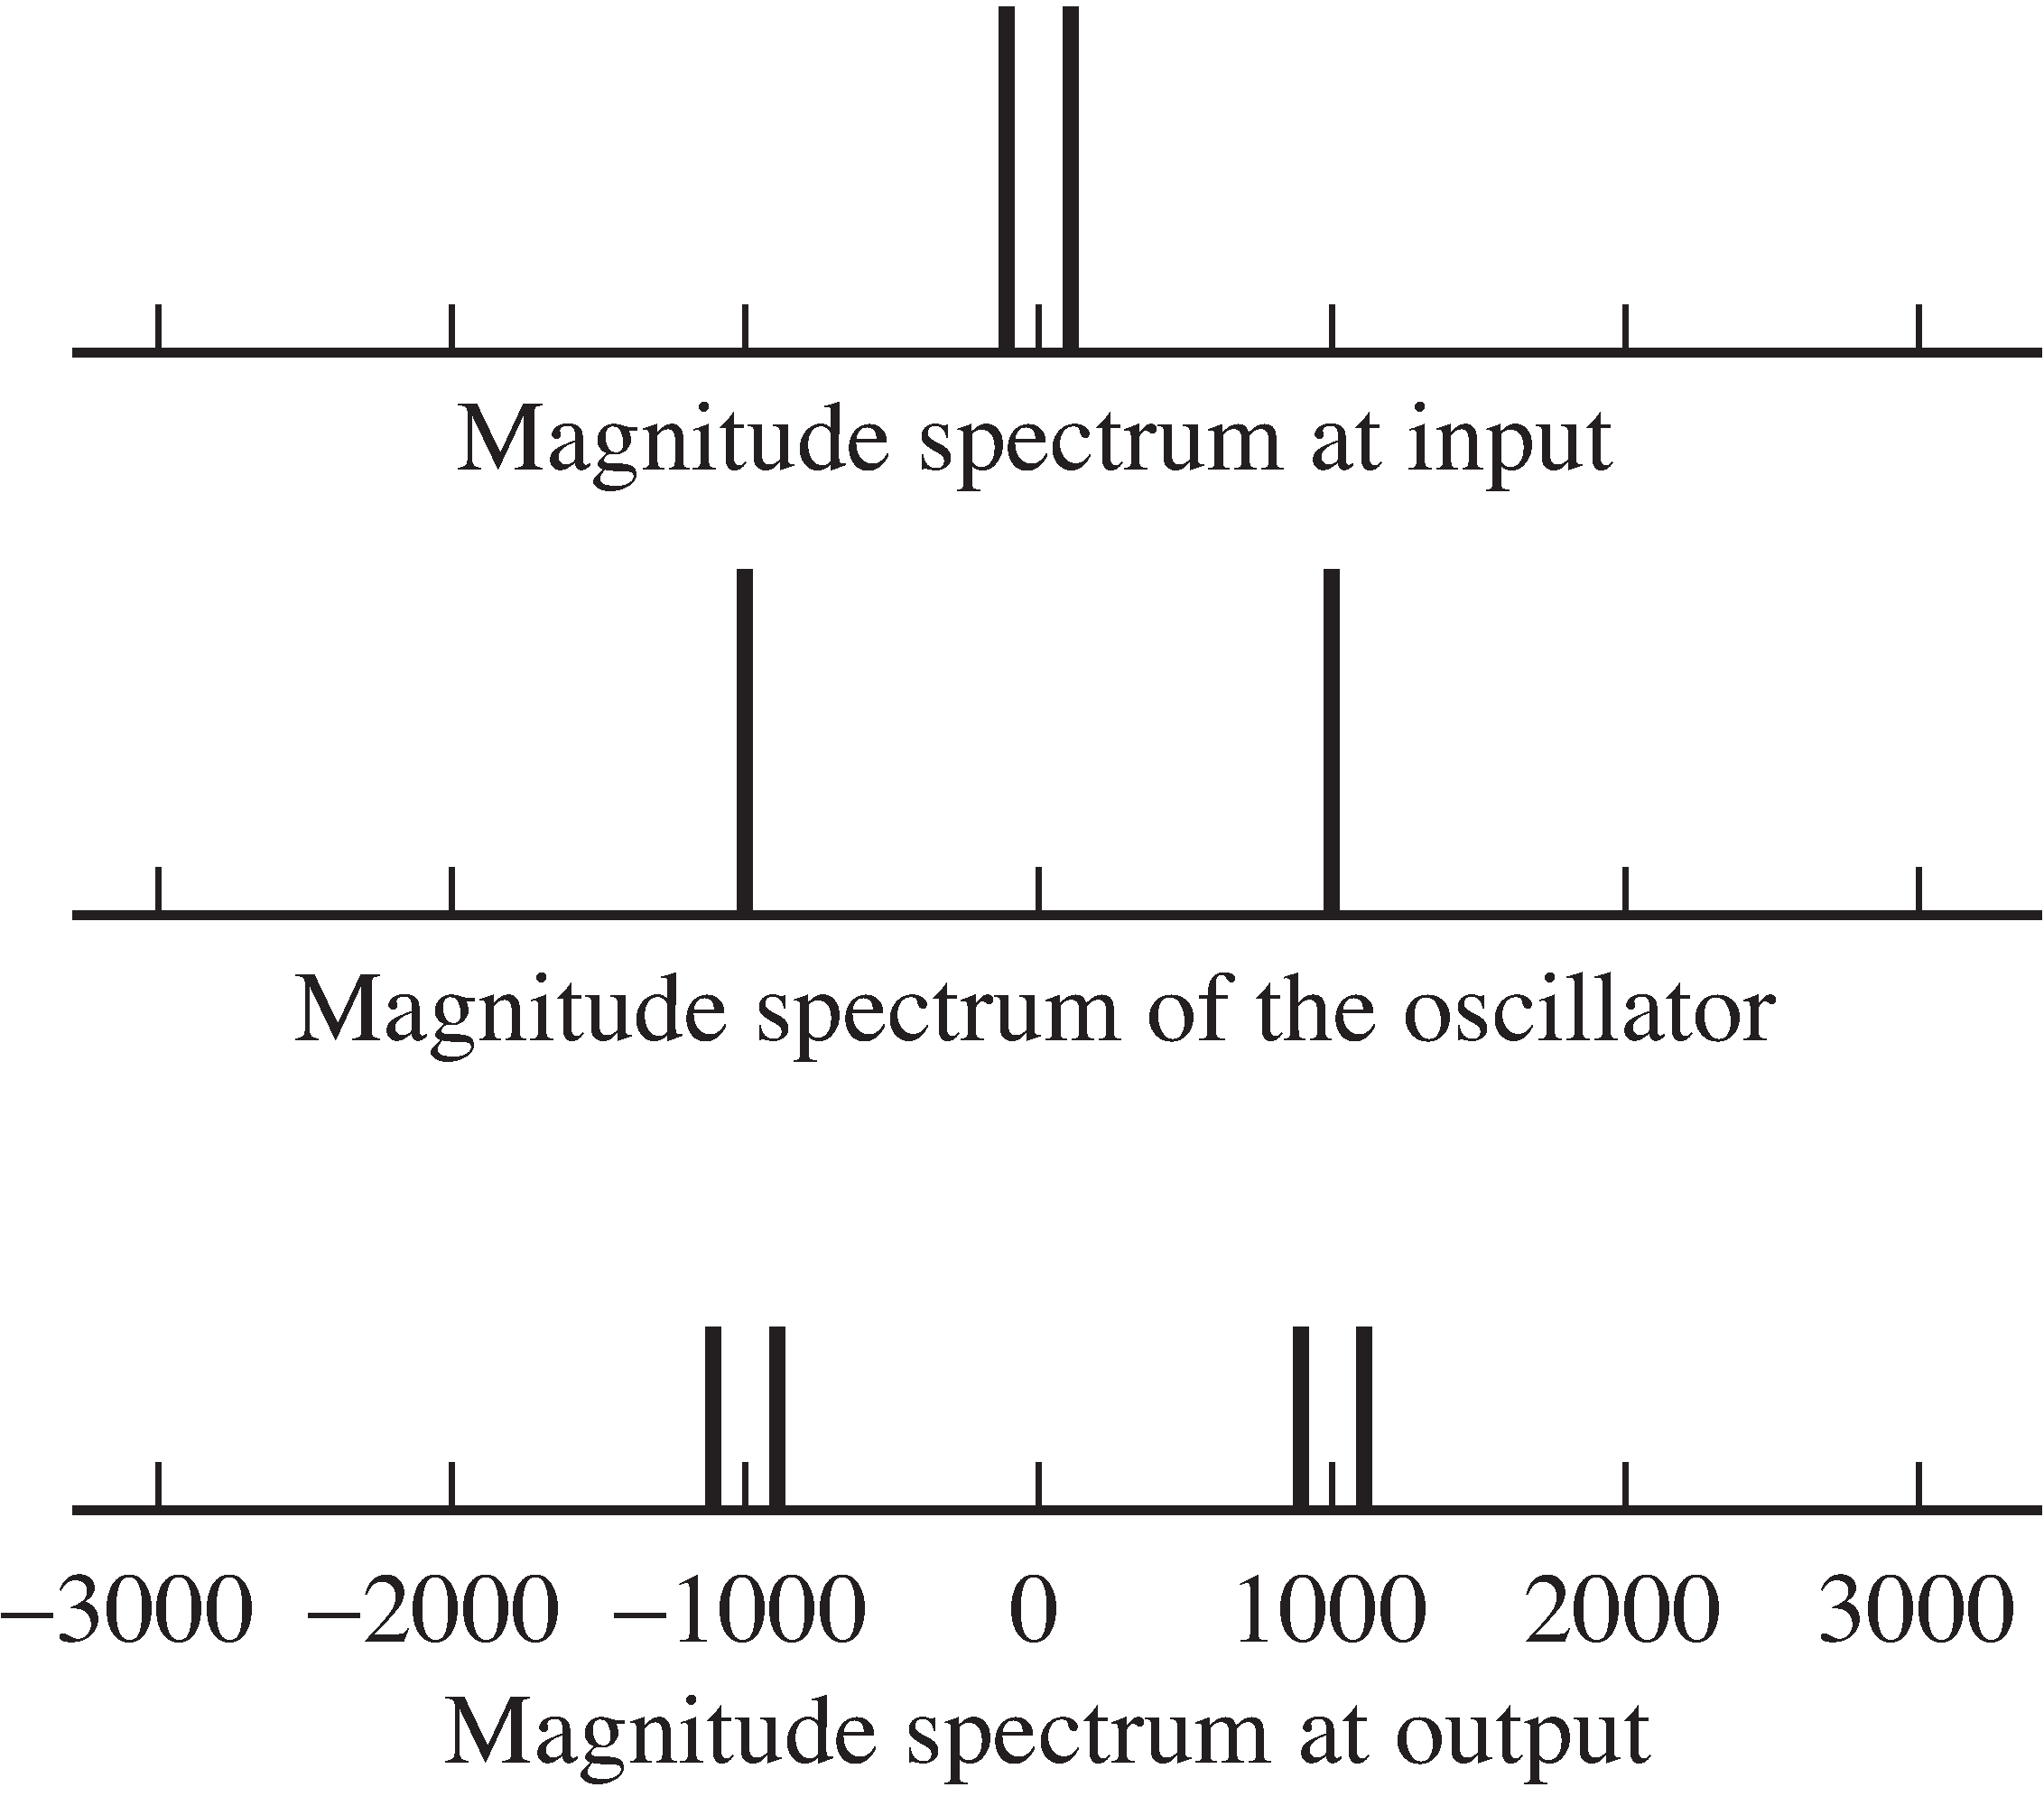 The spectrum of the input sinusoid is shown in the top figure. The middle figure shows the spectrum of the modulating wave. The bottom shows the spectrum of the point-by-point multiplication (in time) of the two, which is the same as their convolution (in frequency).